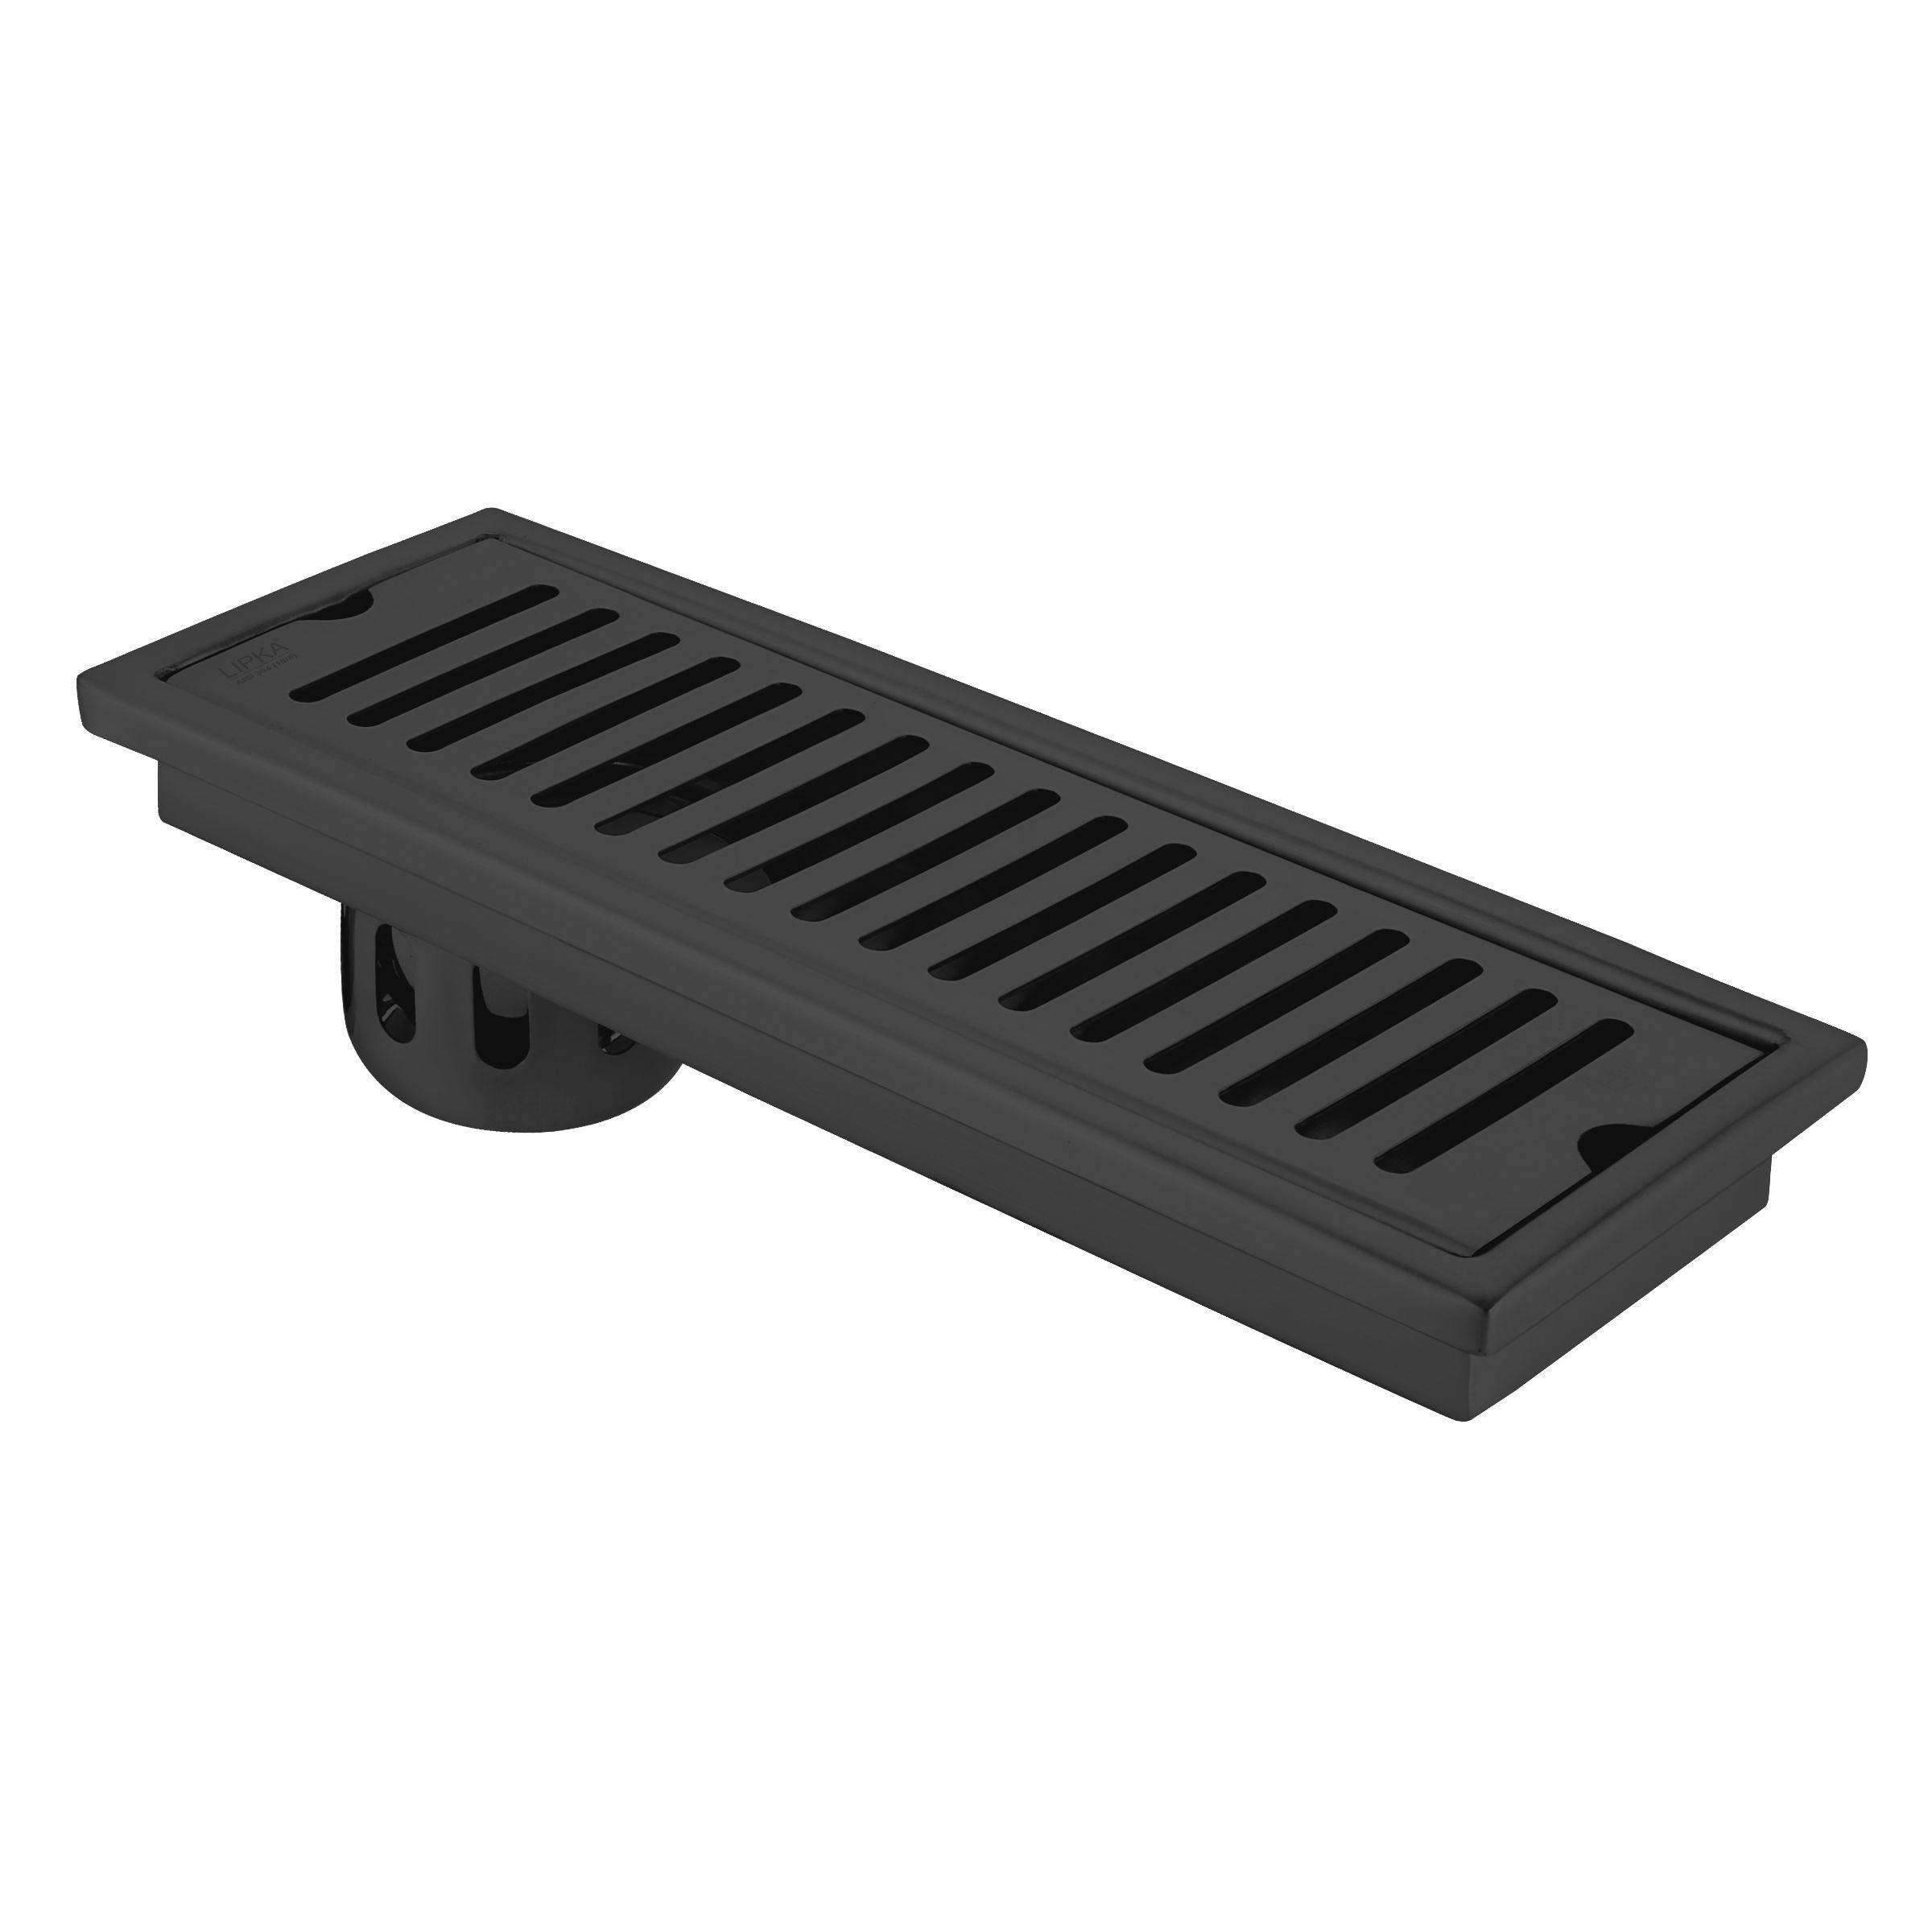 Vertical Shower Drain Channel - Black (24 x 5 Inches)